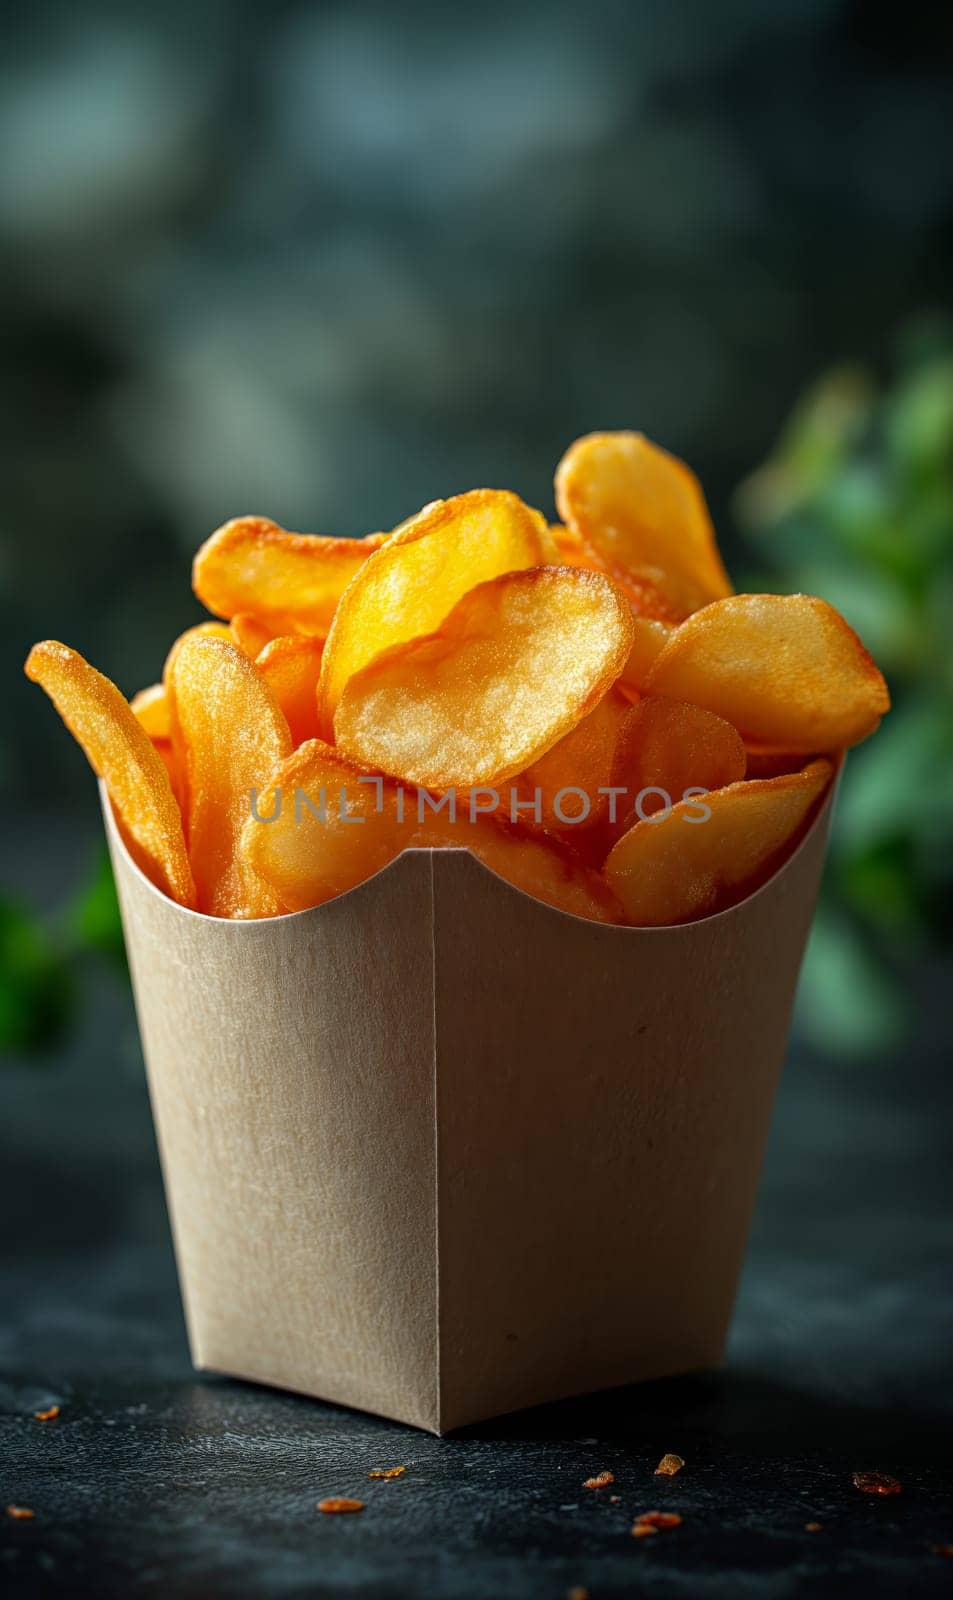 Potato Chips in a Paper Bag on Table. by Fischeron